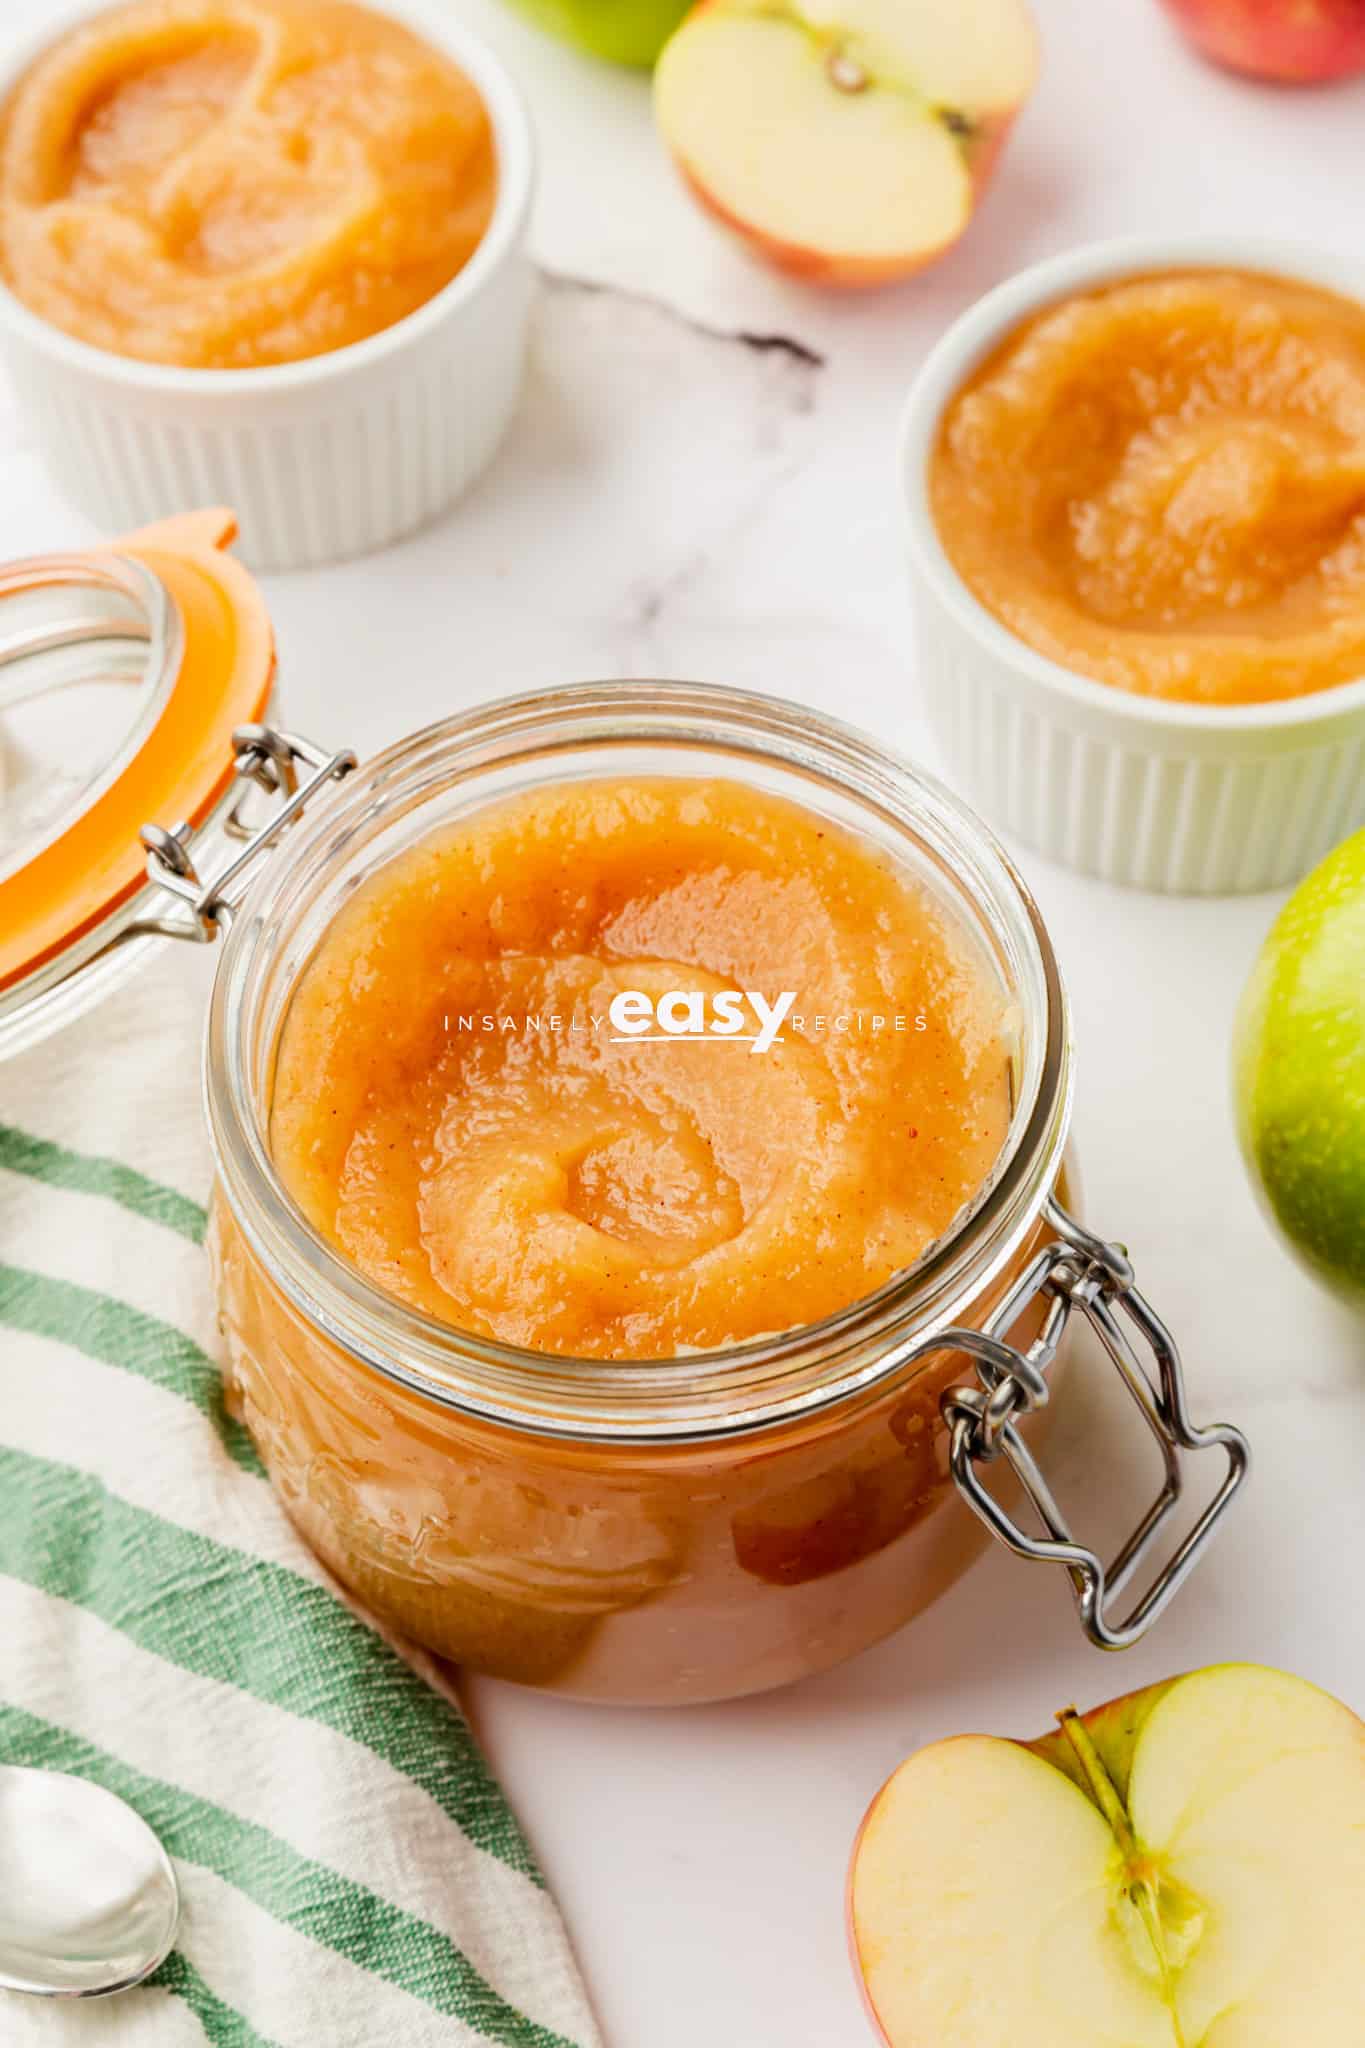 unsweetened applesauce in a clear jar with the lid open. Jar has metal latch. Bowl of applesauce to the top right.